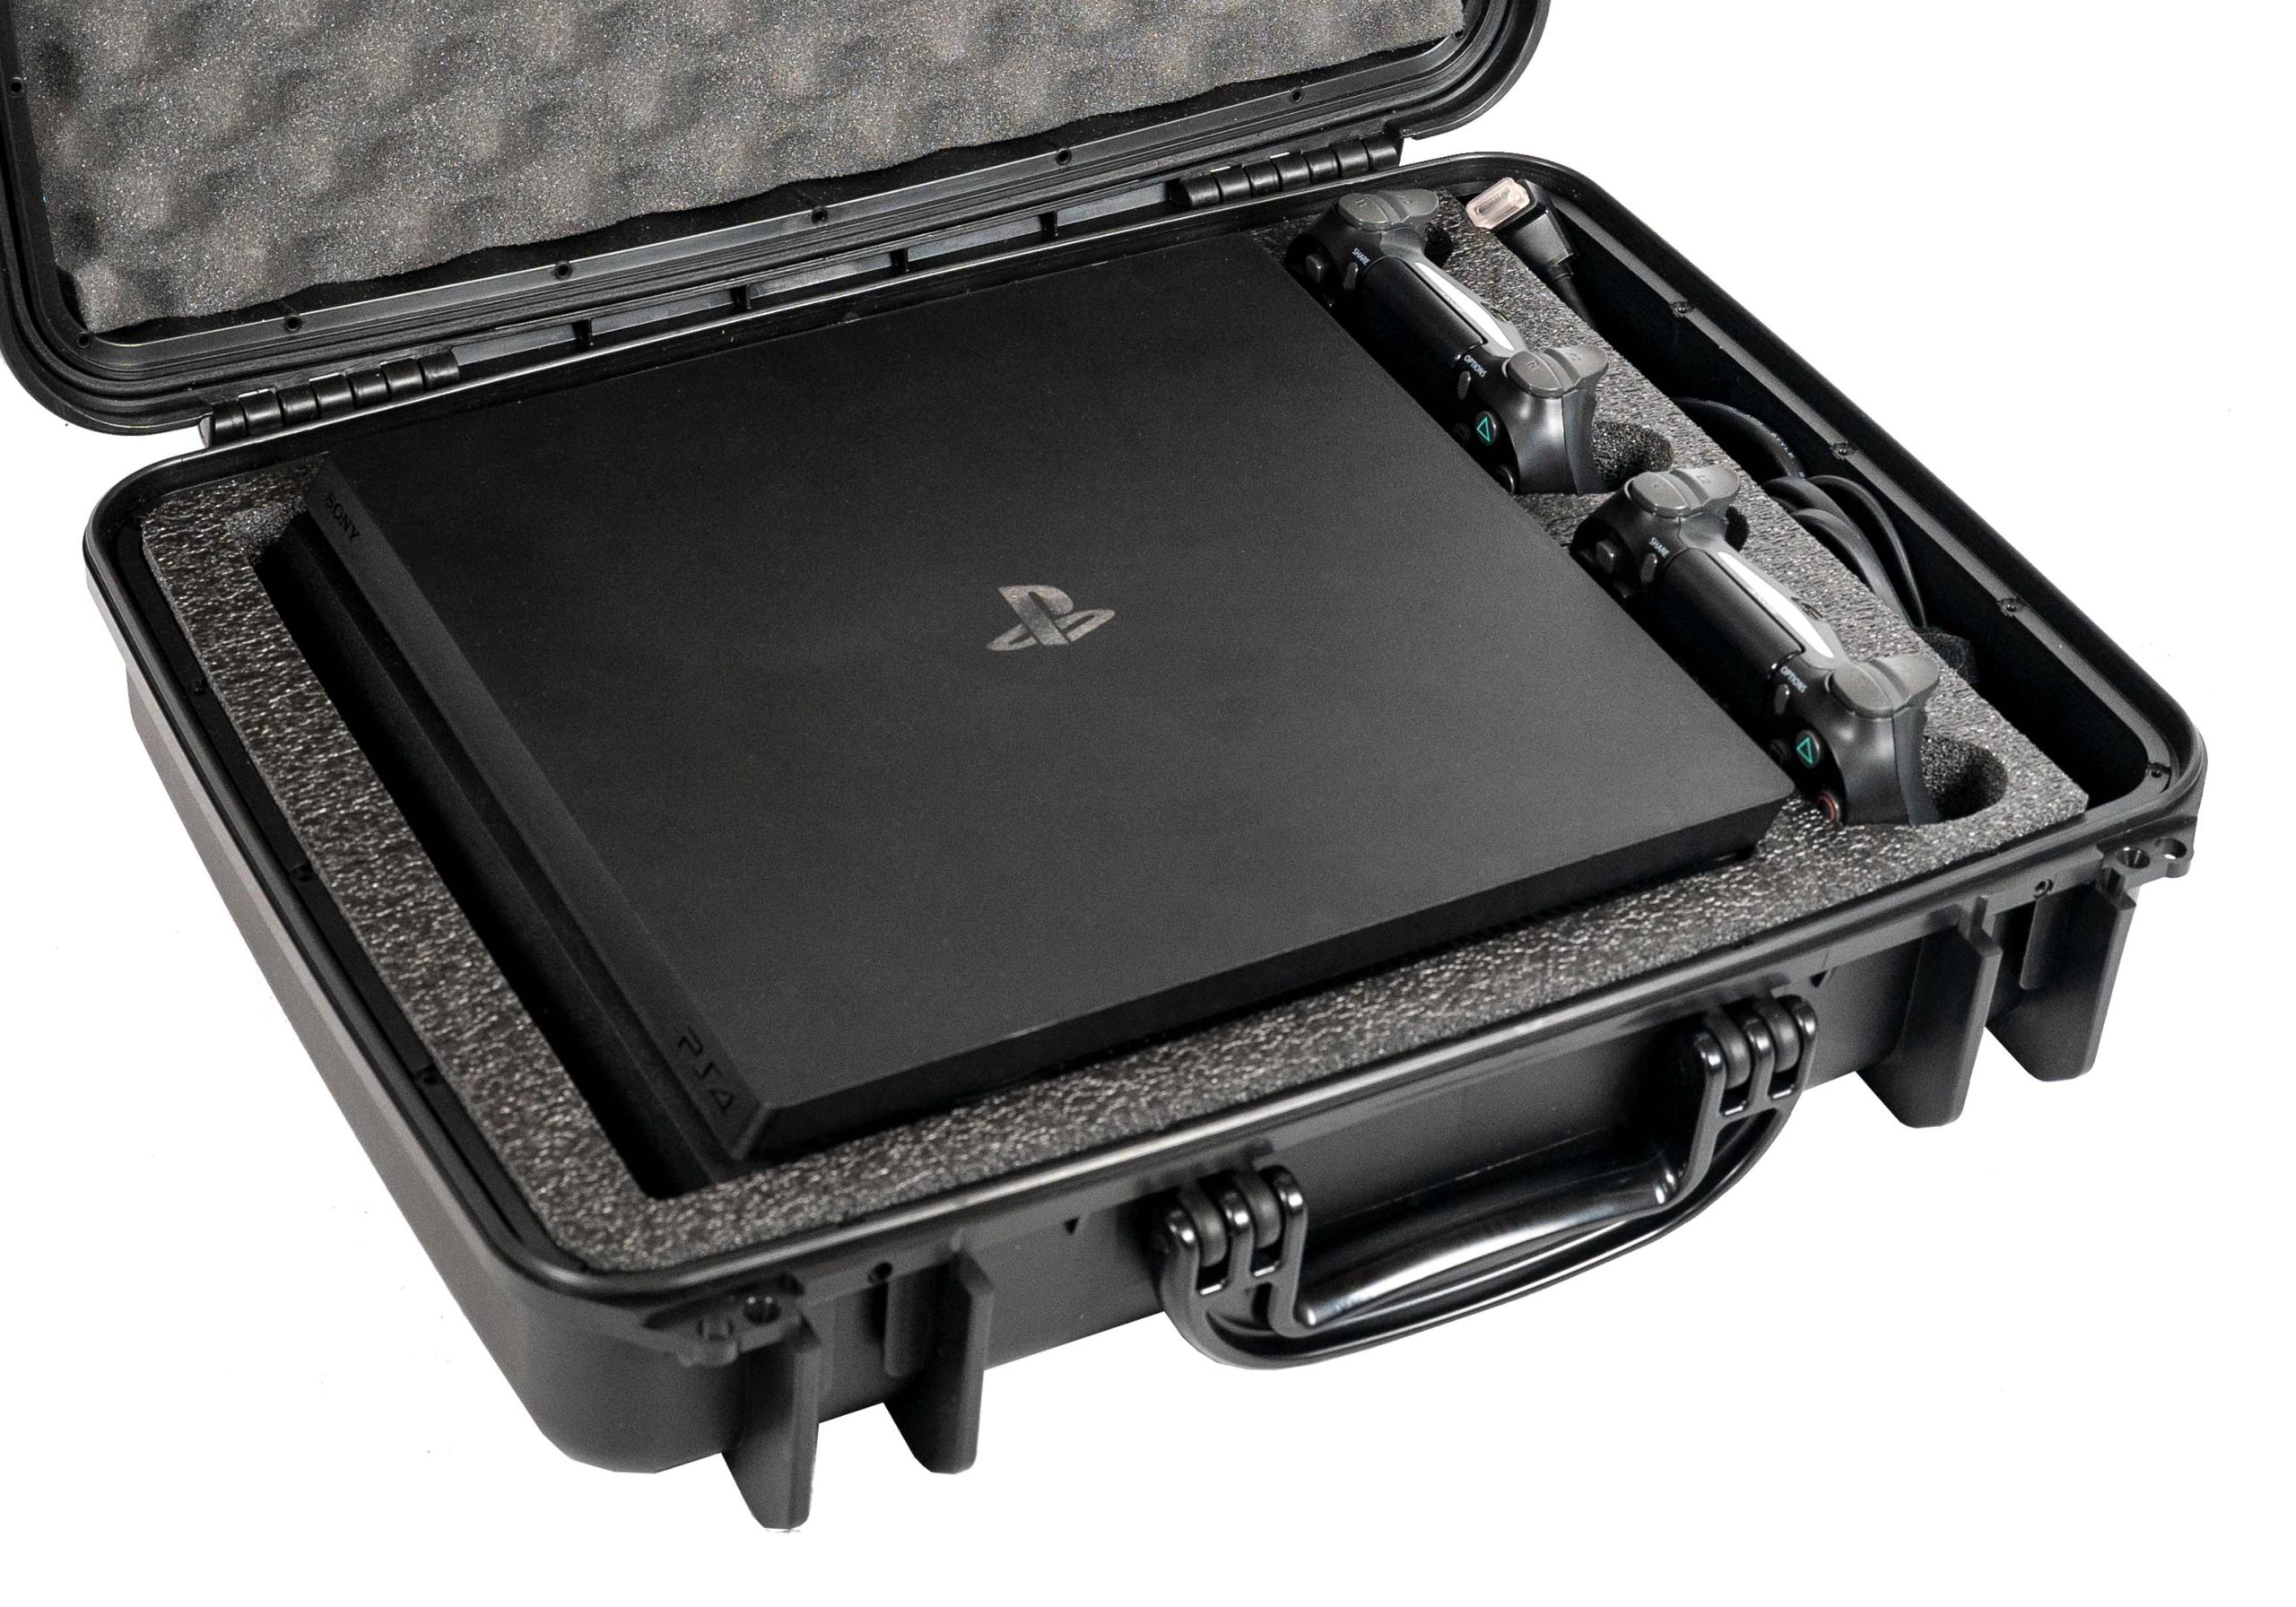 ps4 in case